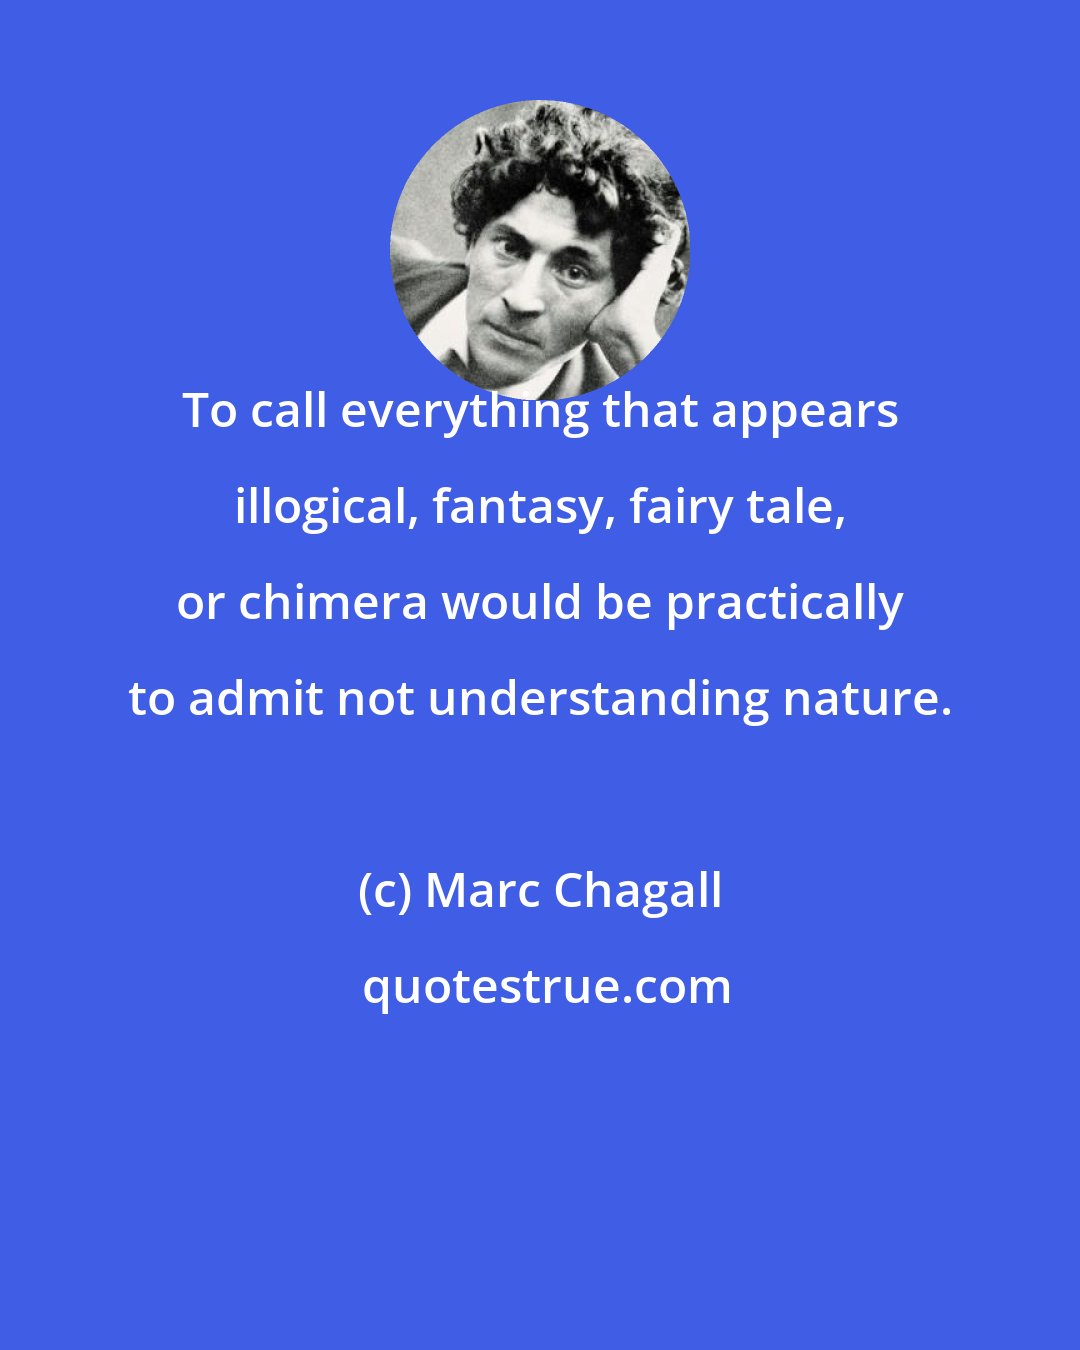 Marc Chagall: To call everything that appears illogical, fantasy, fairy tale, or chimera would be practically to admit not understanding nature.